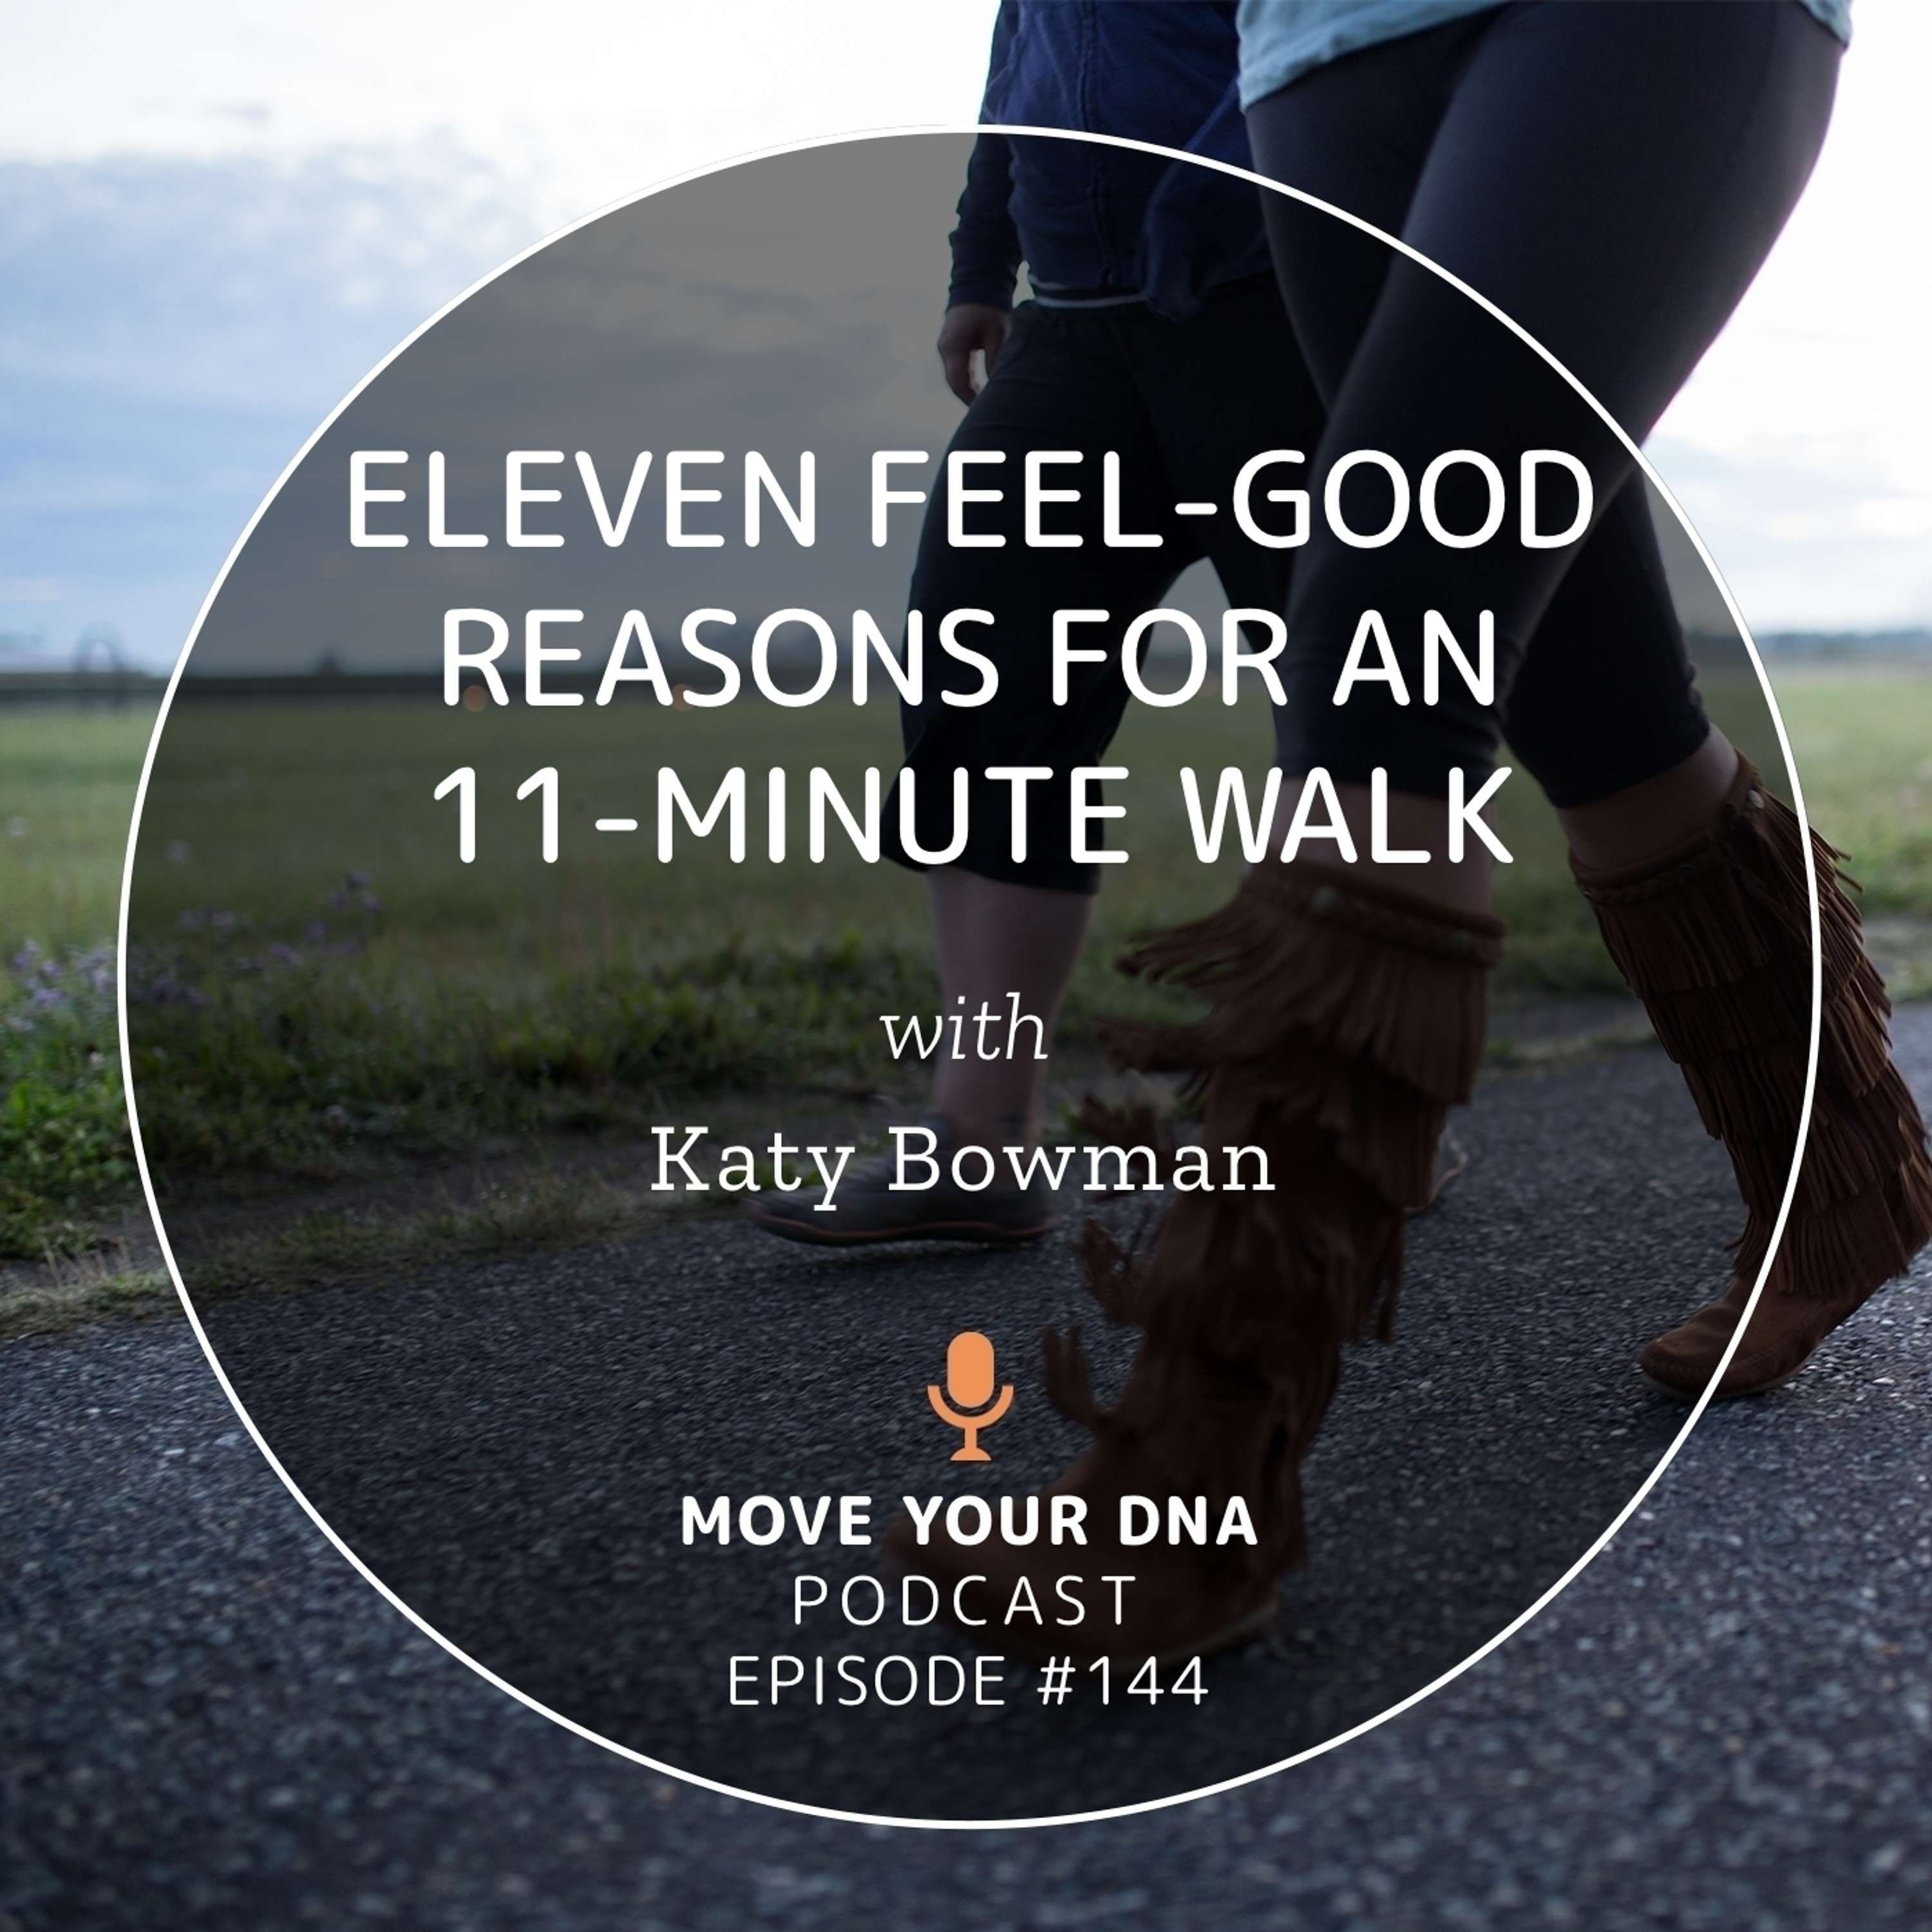 Ep 144: Eleven Feel-Good Reasons For An 11-Minute Walk